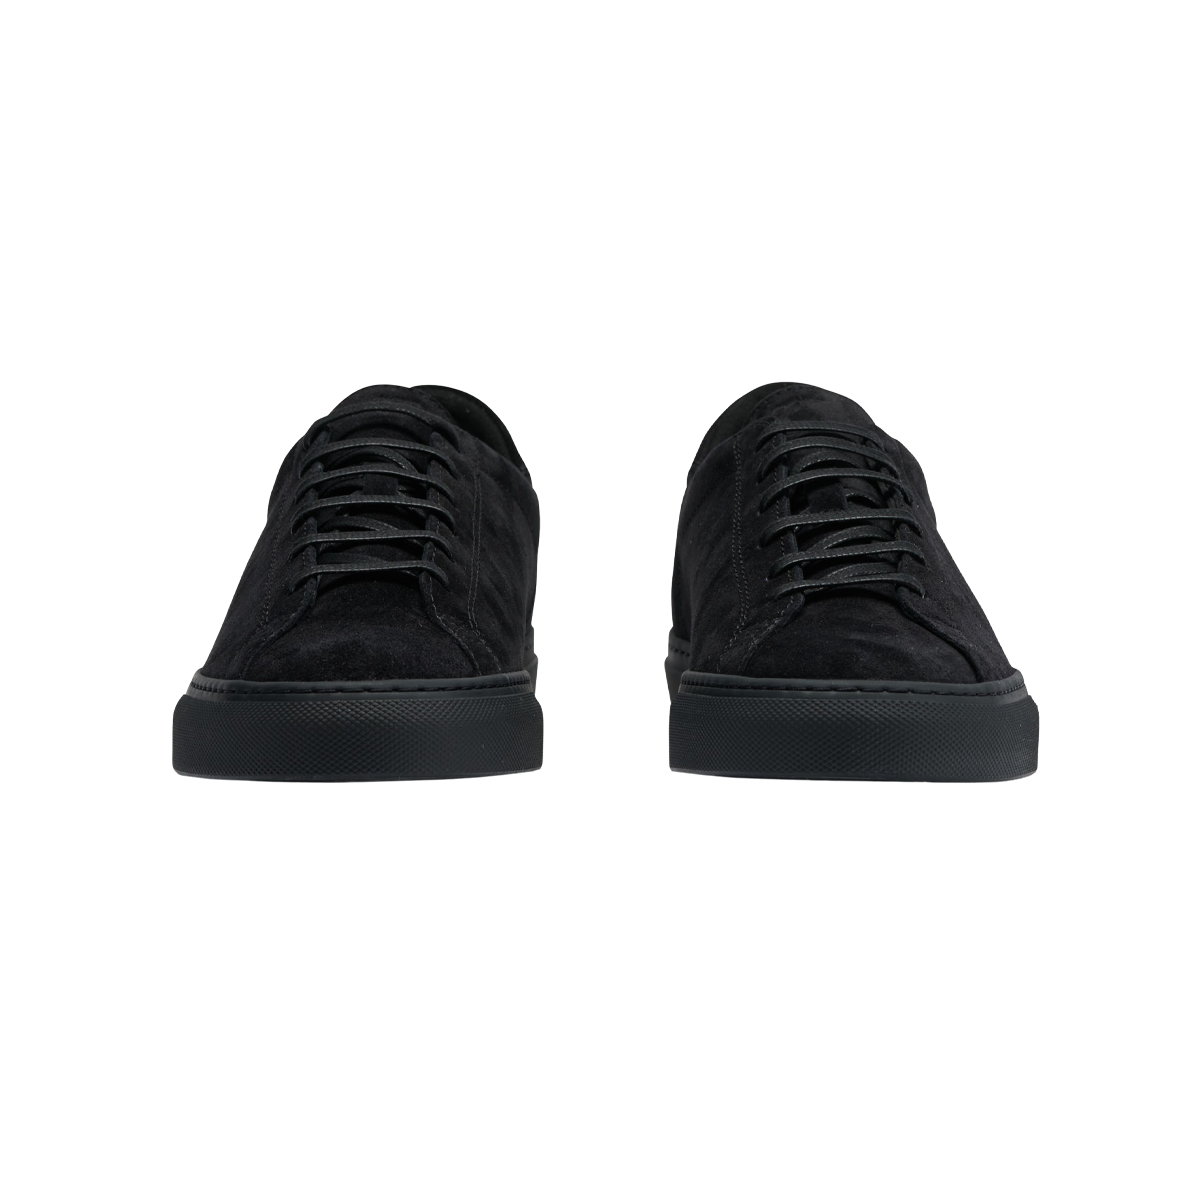 A pair of handmade All Black Suede Racquet Sr sneakers by CQP on a white background.